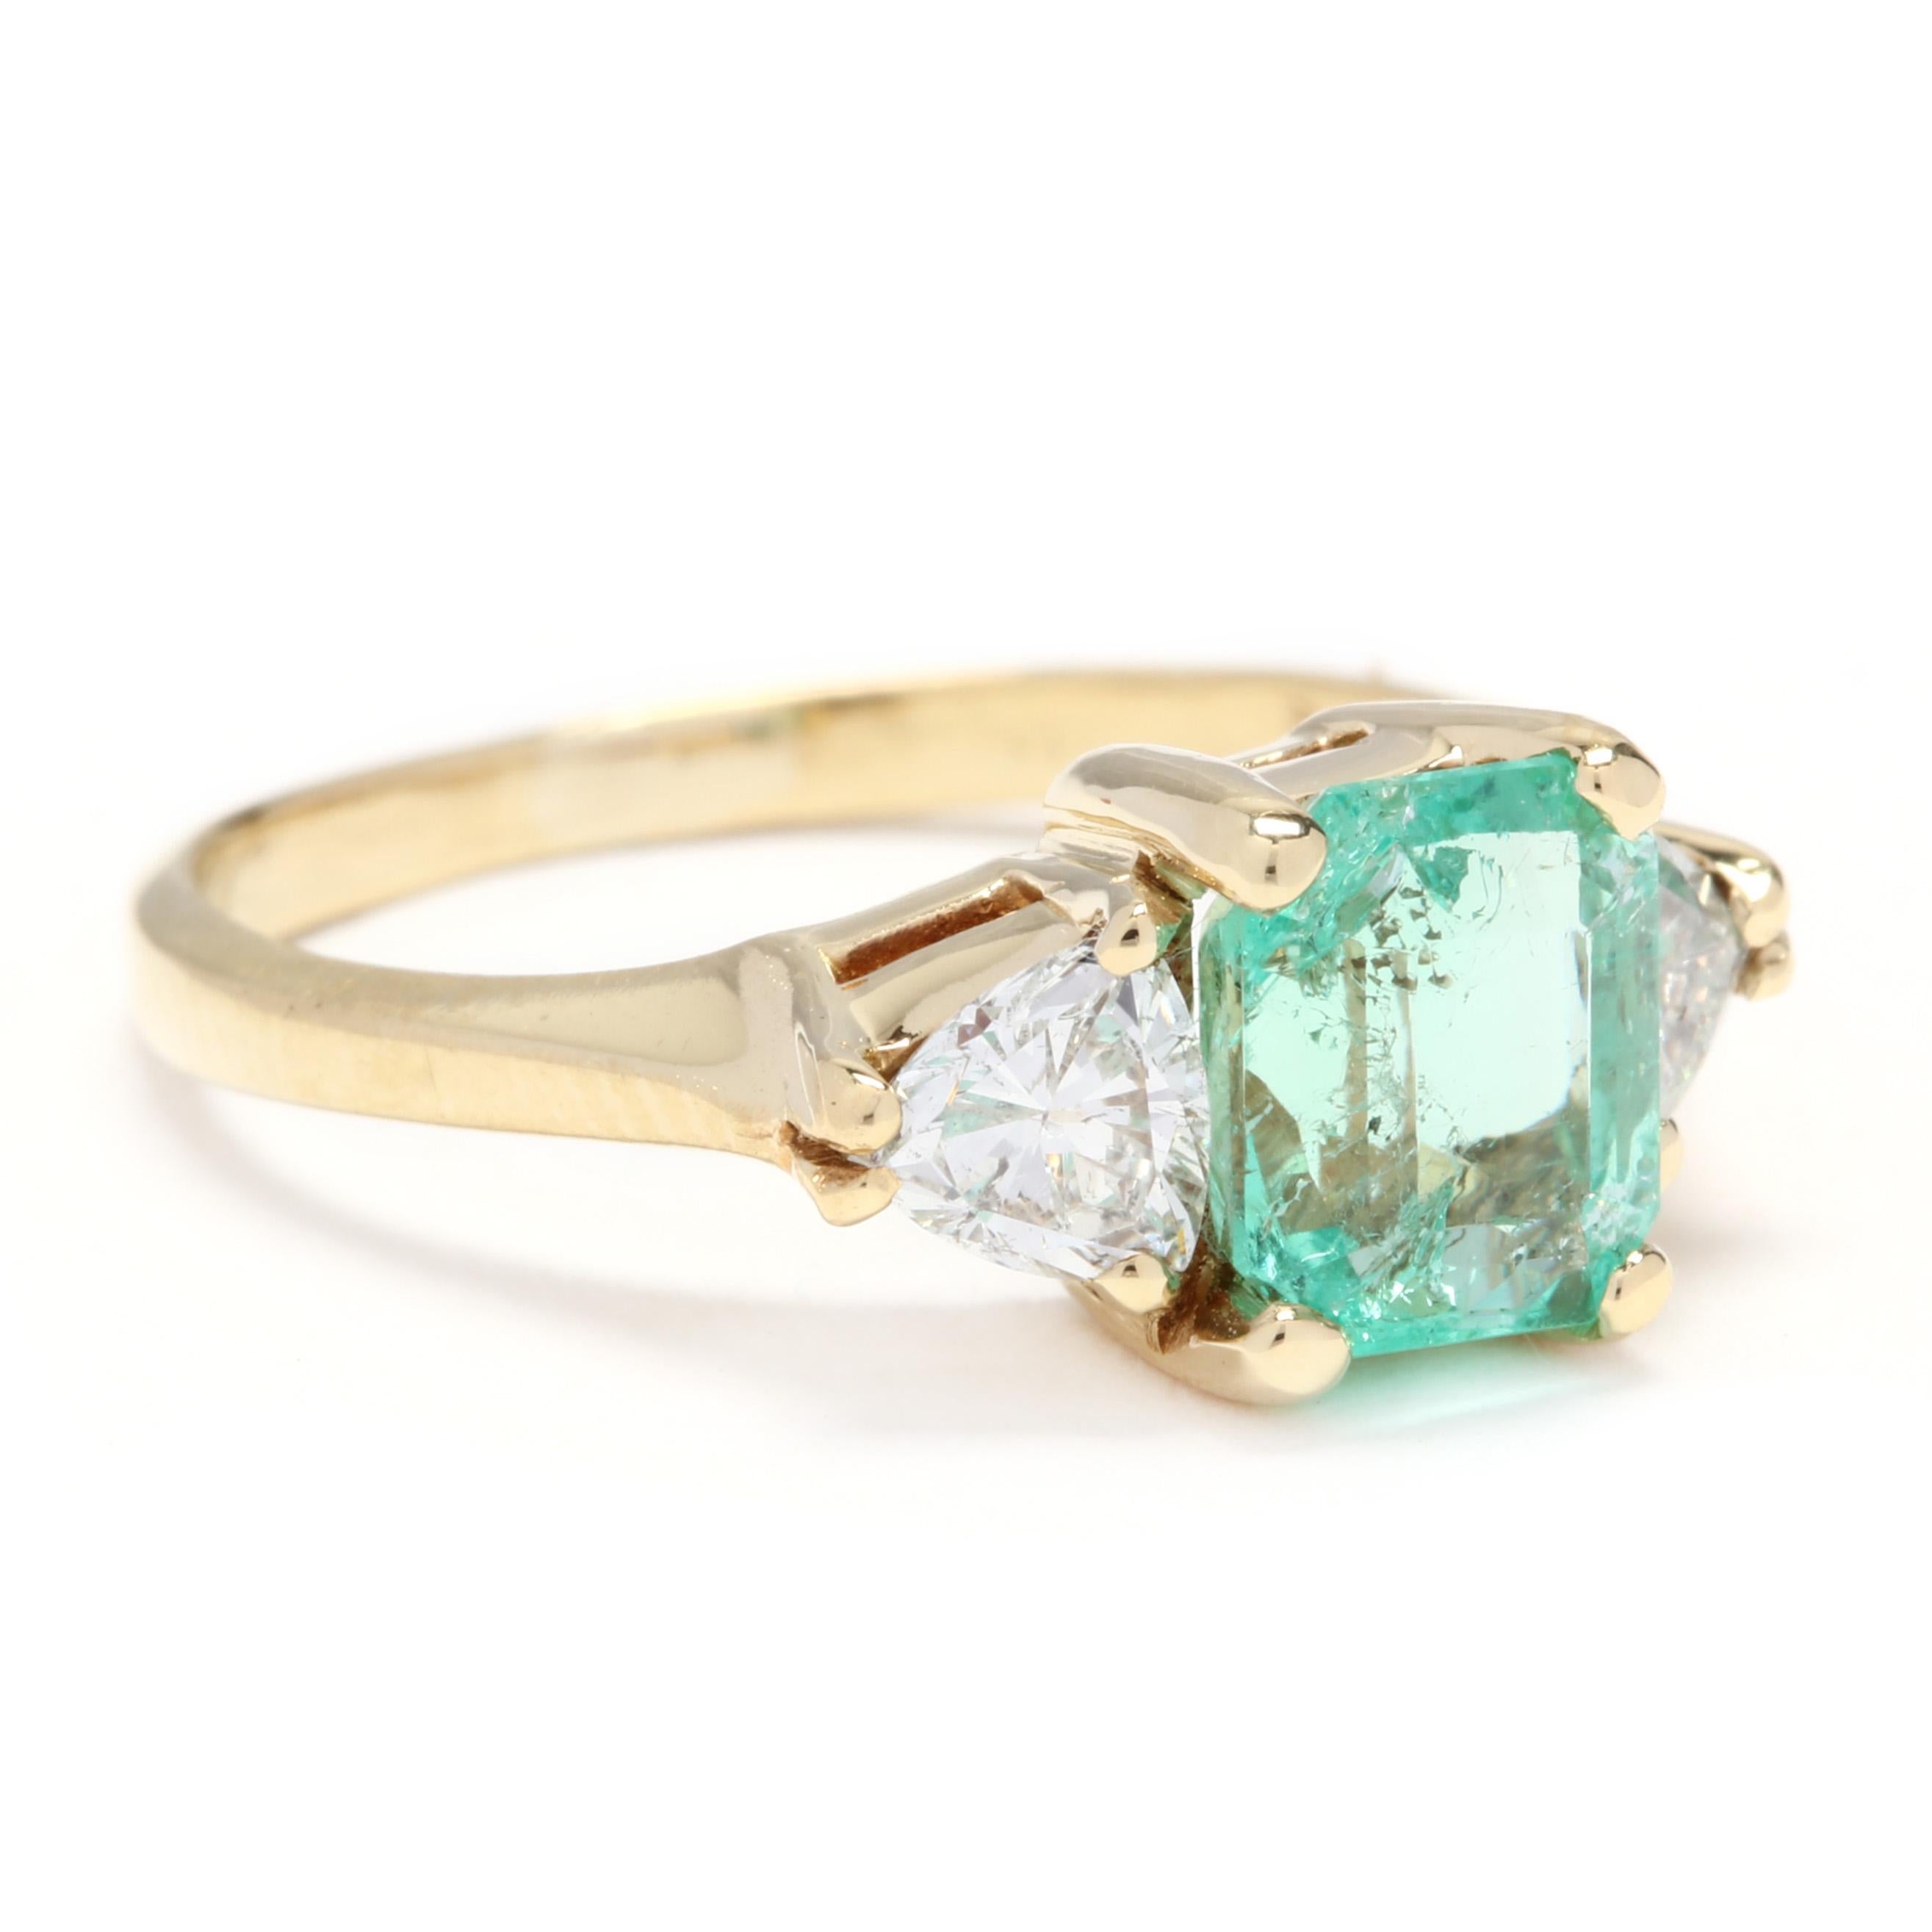 An 18 karat yellow gold, emerald and trillion diamond three stone ring. Centered on a prong set, emerald cut emerald weighing approximately 1.30 carat with a prong set, trillion cut diamond on either side weighing approximately .50 total carats and